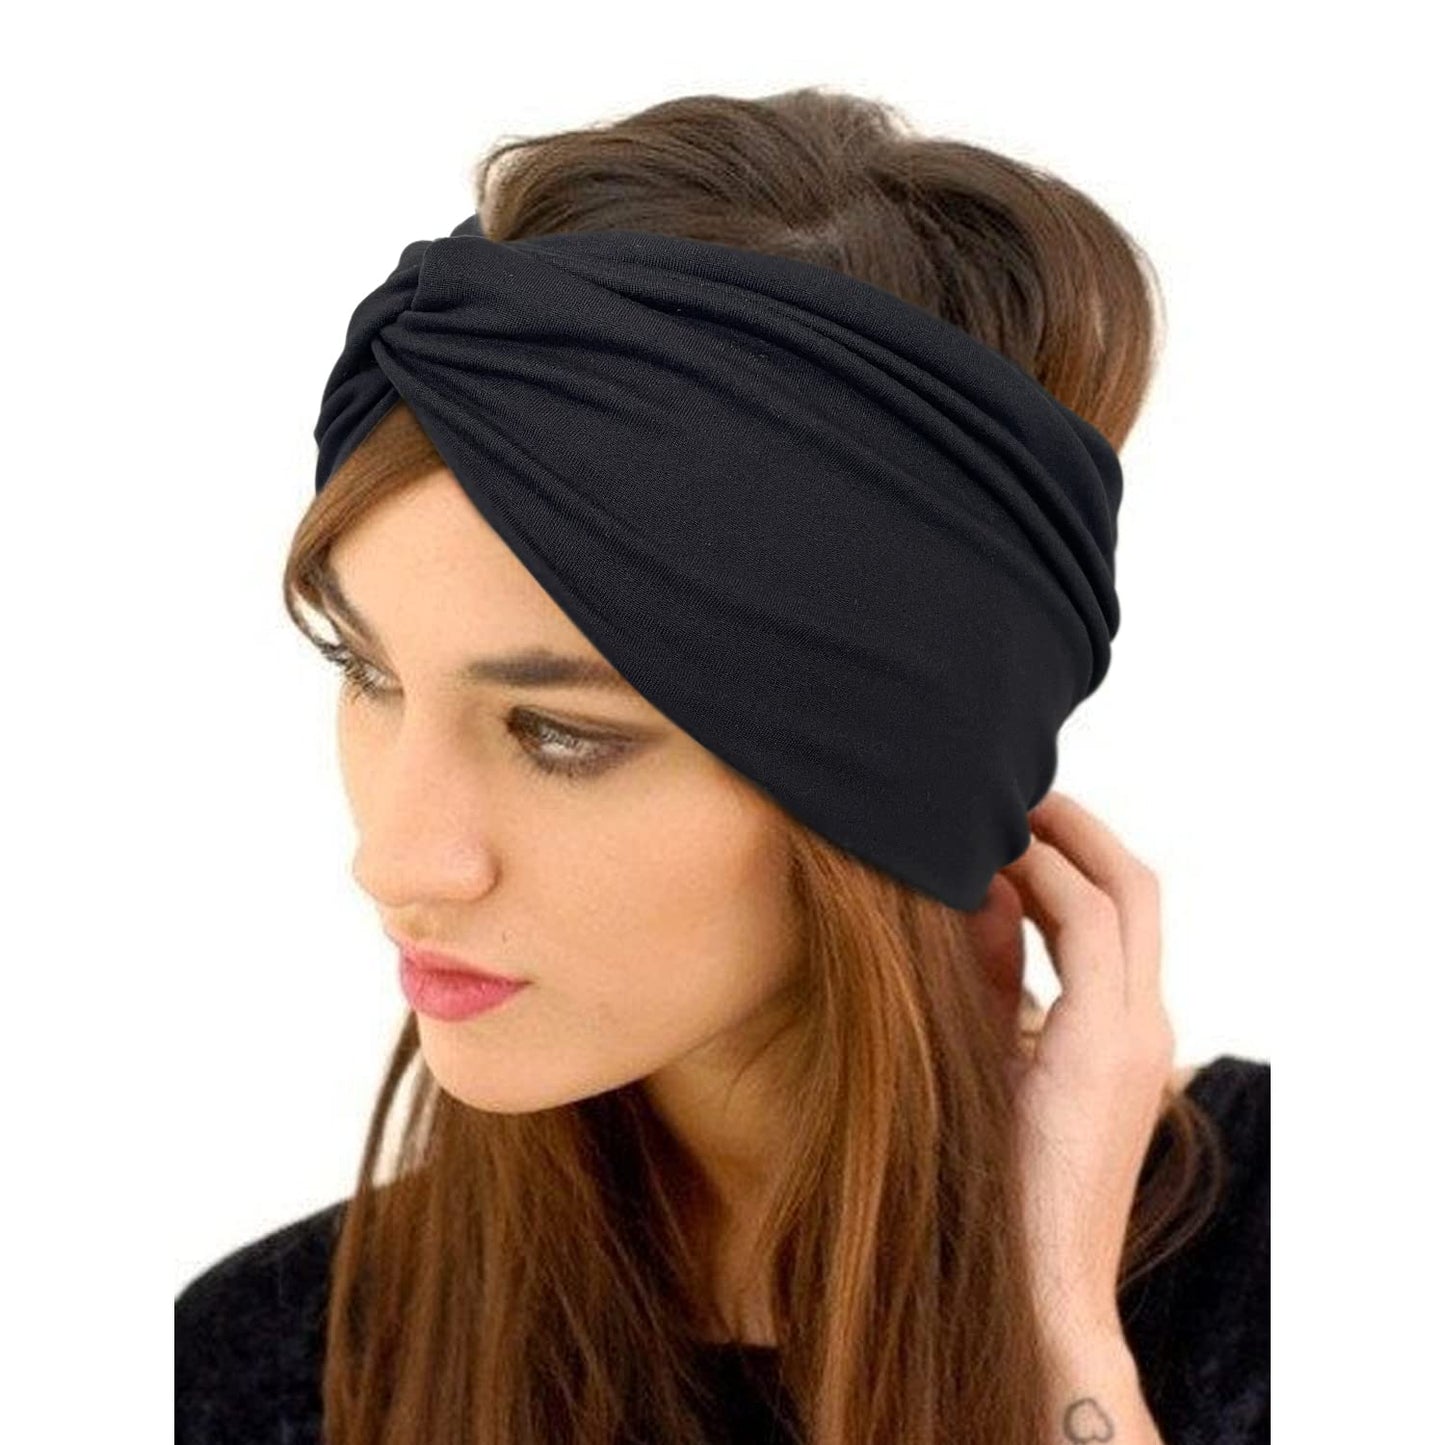 Jesries 10 PCS Women Headbands African Wide Hair Wrap Extra Turban Head Bands for Lady Large Sport Workout Stretch Non-slip Big Hair Bands